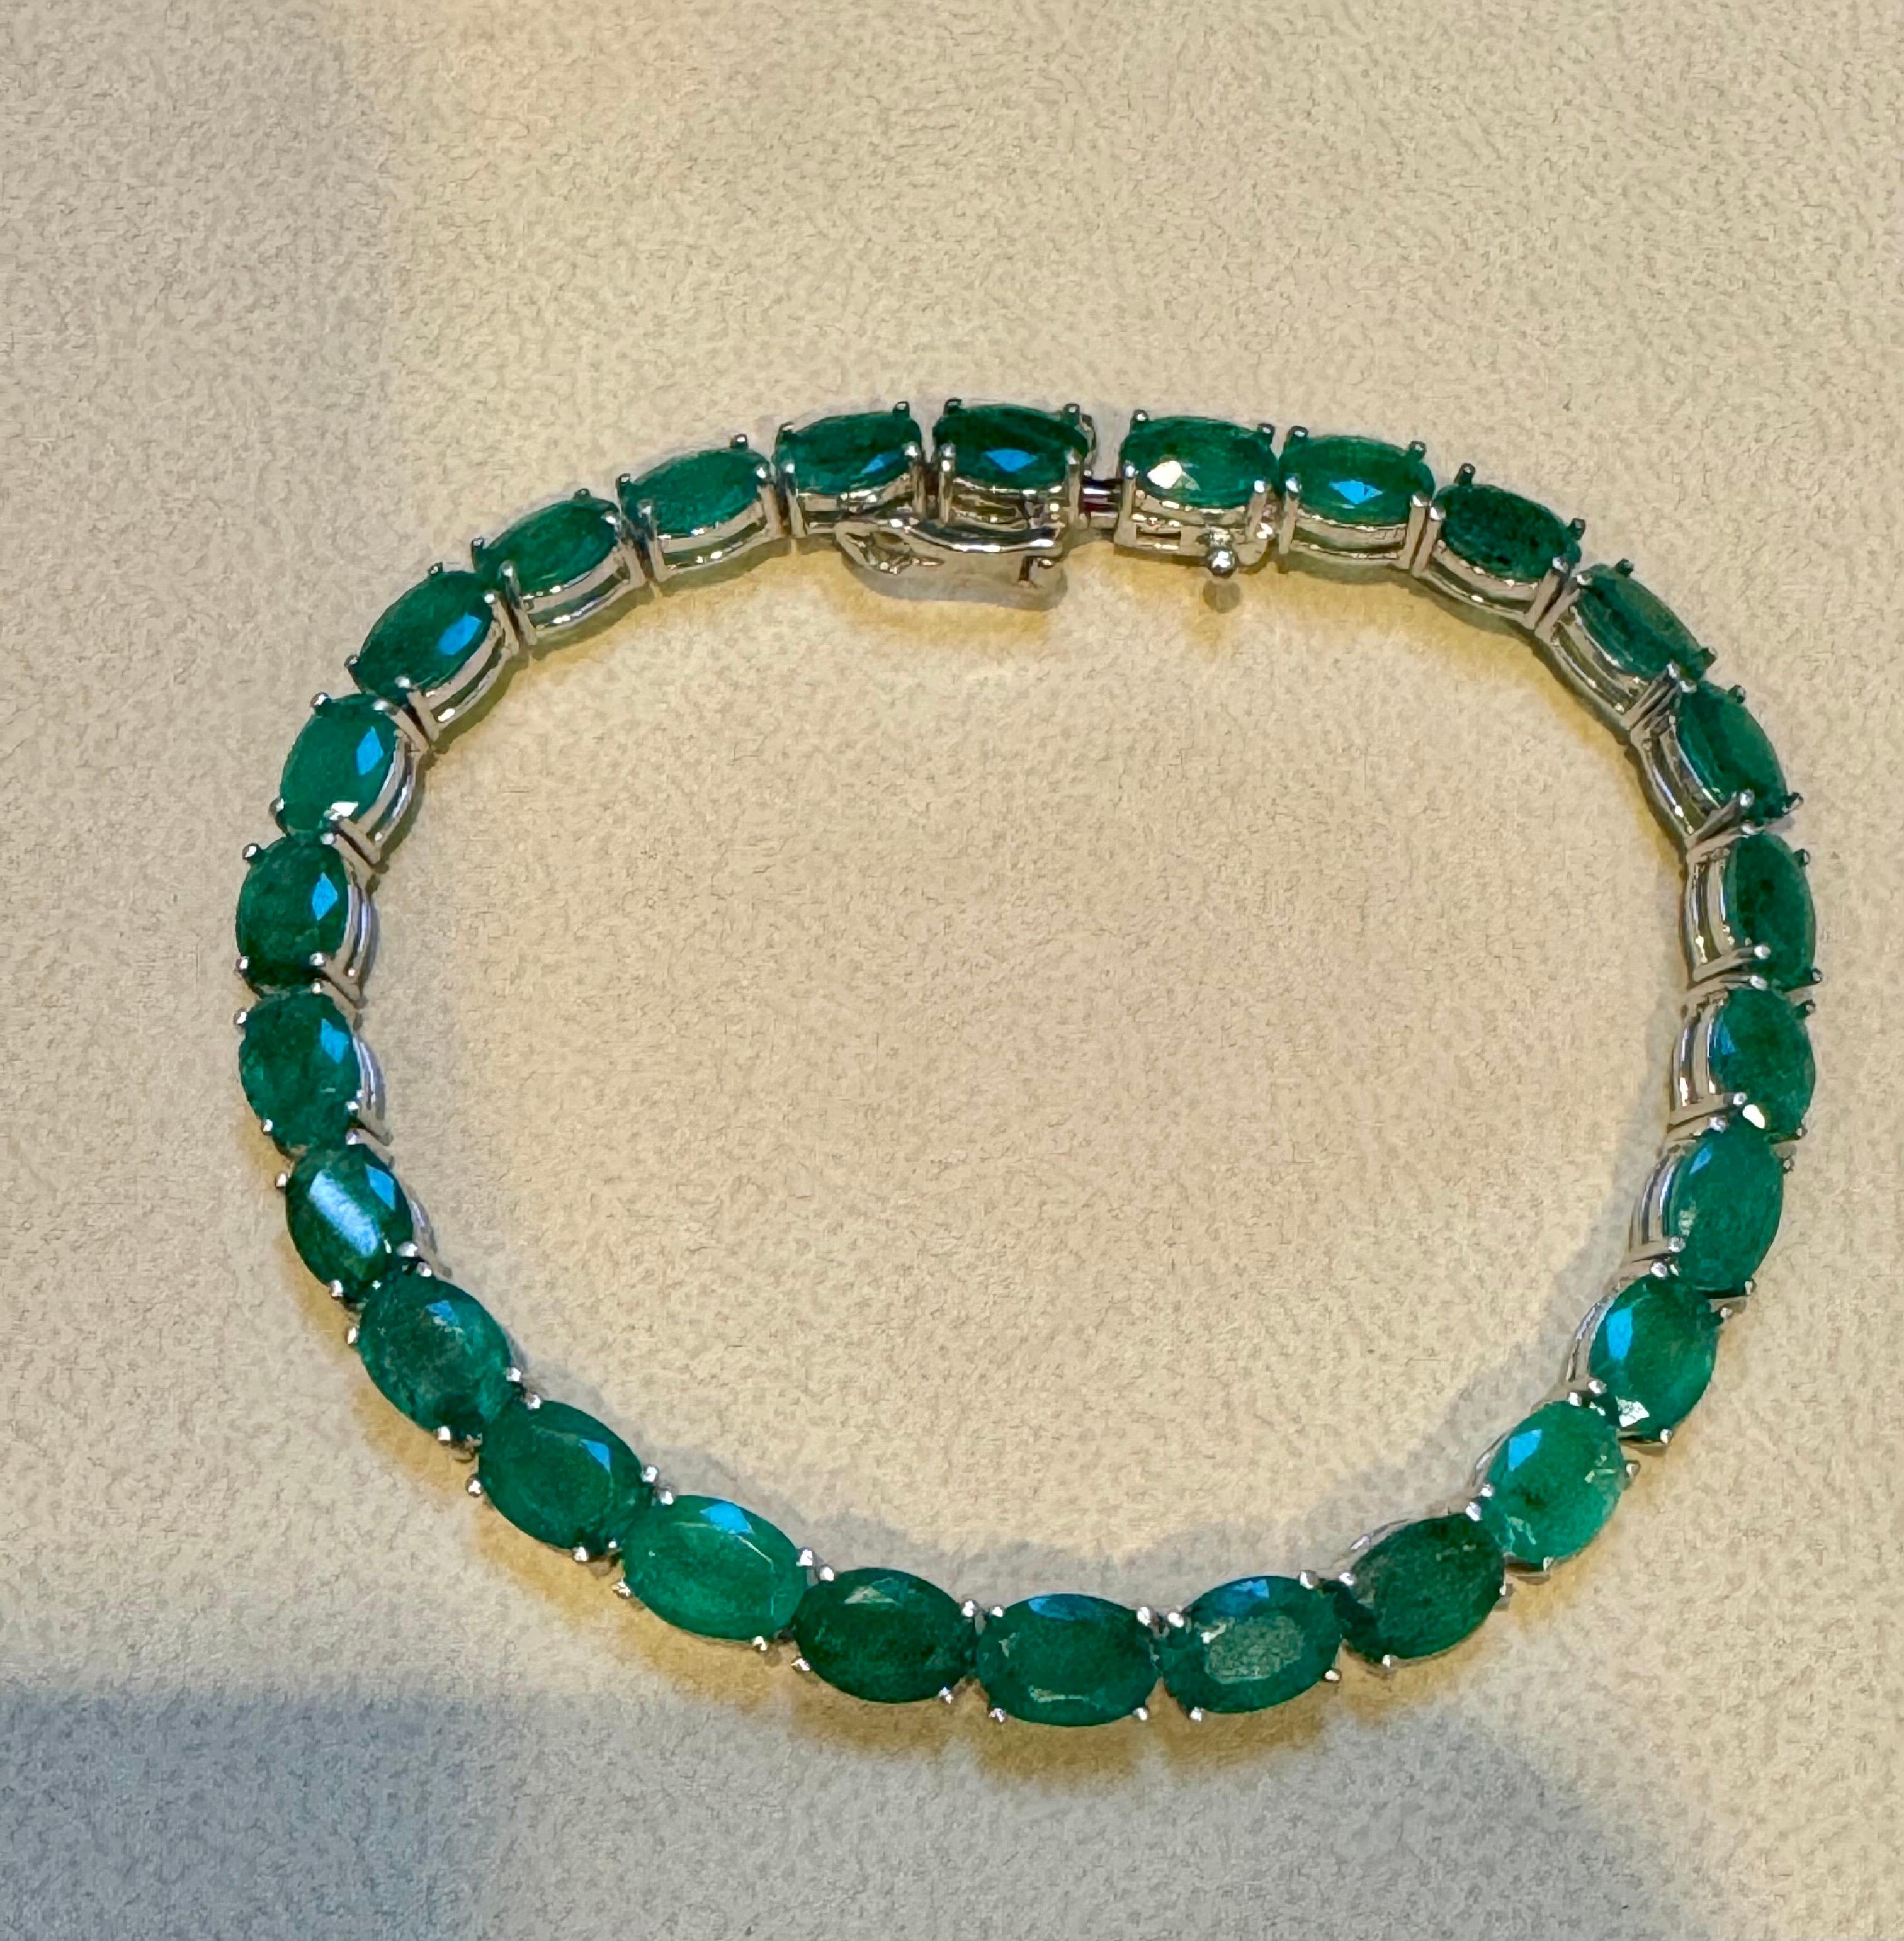  This exceptionally affordable Tennis  bracelet has  27  stones of oval  Emeralds  .  Total weight of the Emeralds is  approximately 18 carat. 
The bracelet is expertly crafted with 10  grams of  14 karat Yellow  gold . Have a safety clasp